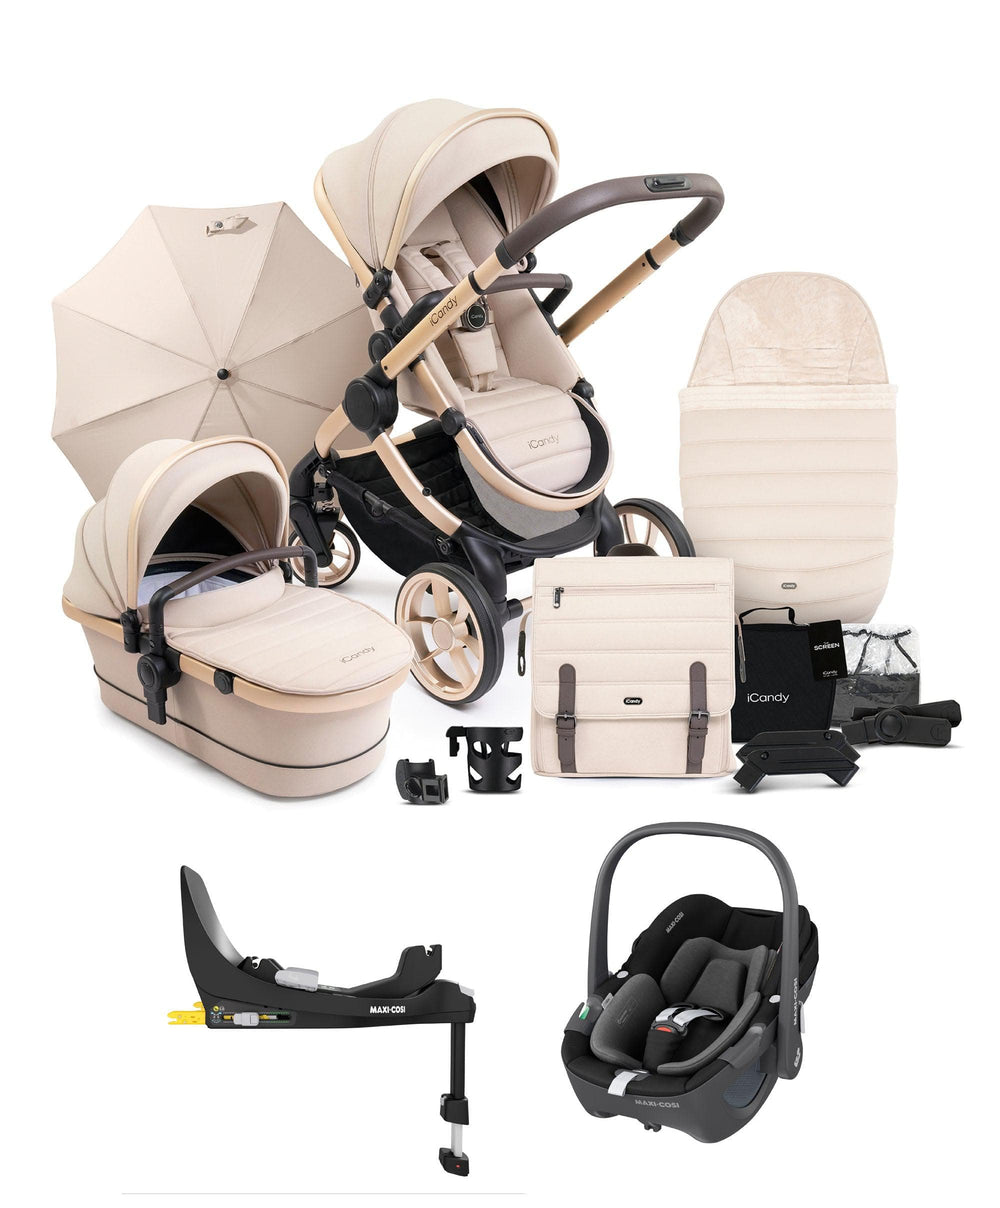 iCandy iCandy Peach 7 Pushchair Bundle with Maxi-Cosi Pebble 360 Car Seat - Biscotti